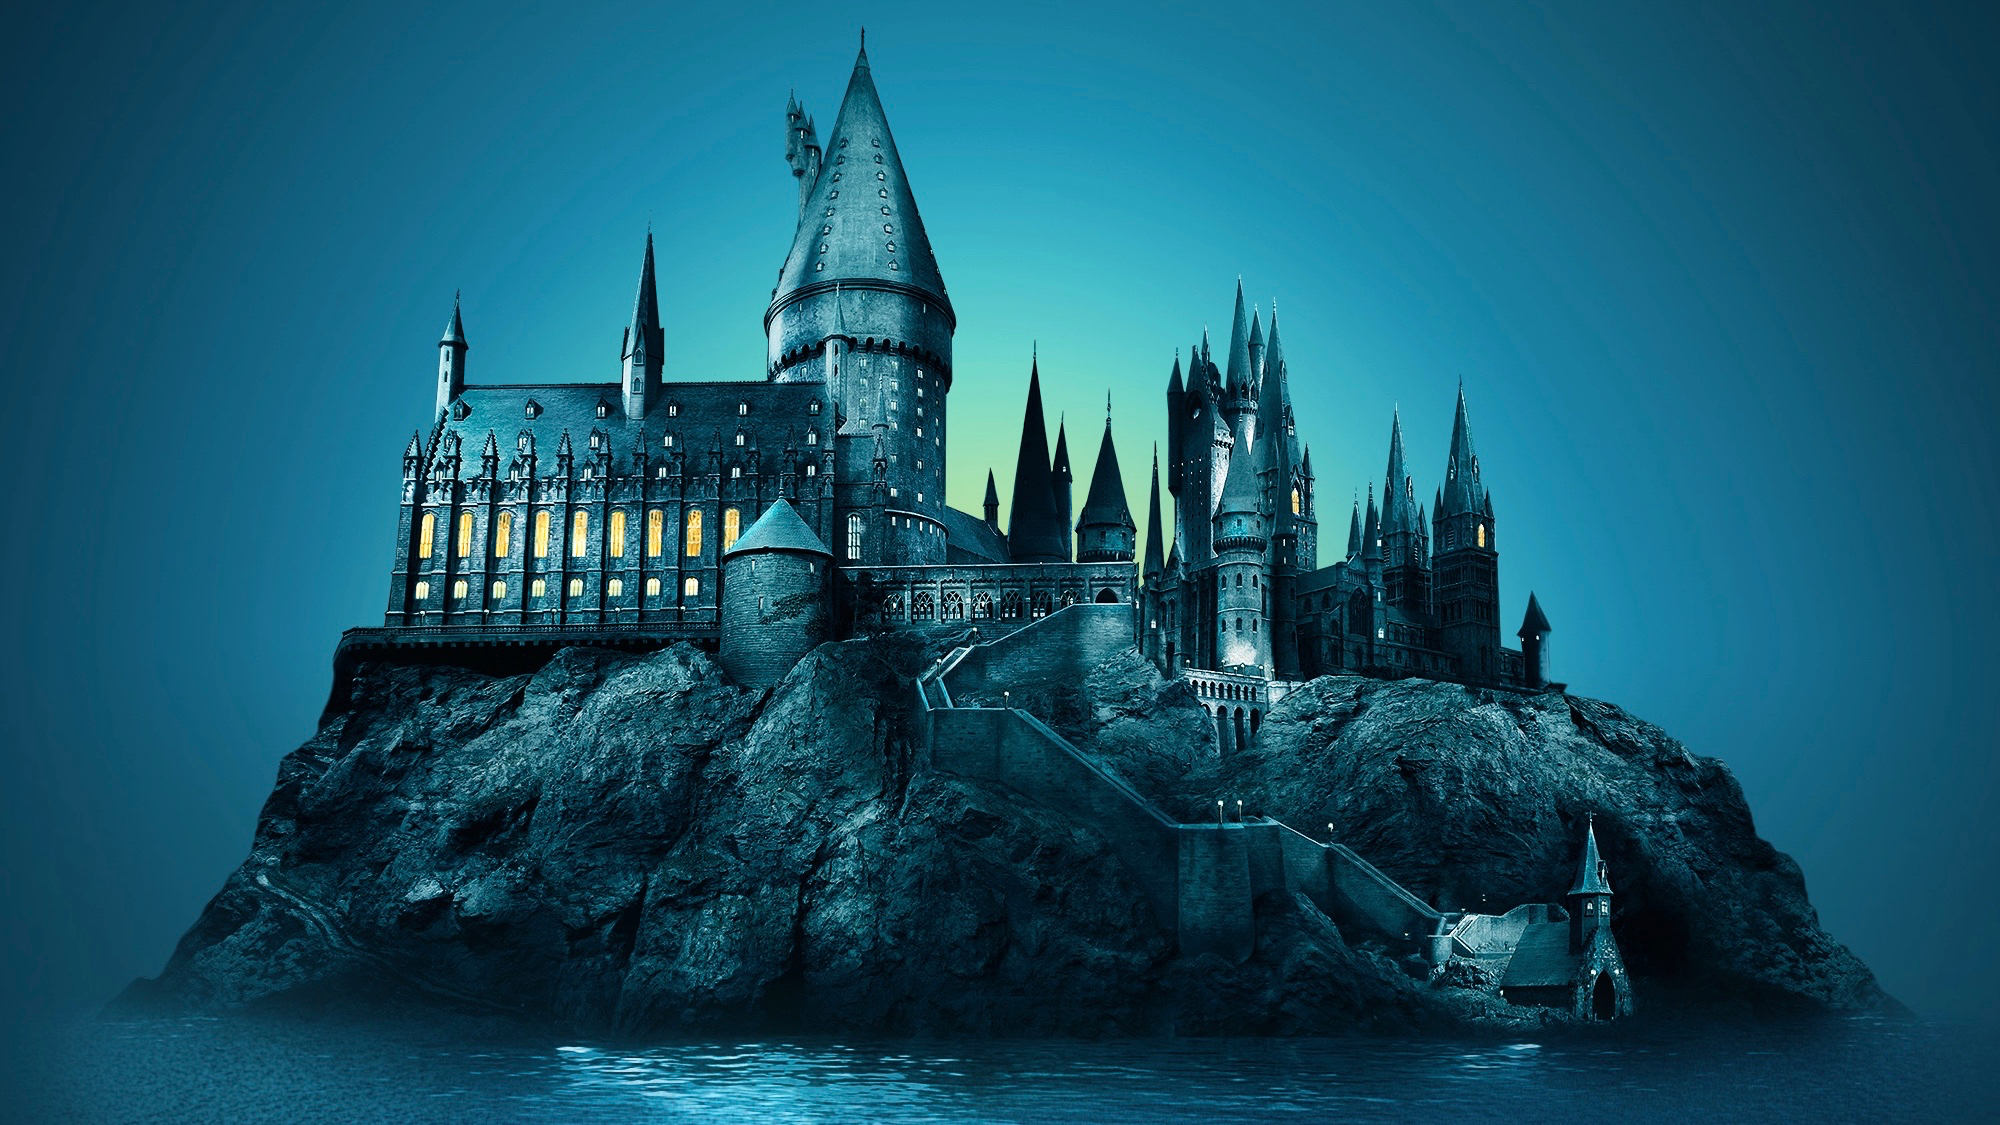 Harry Potter Hd Wallpapers